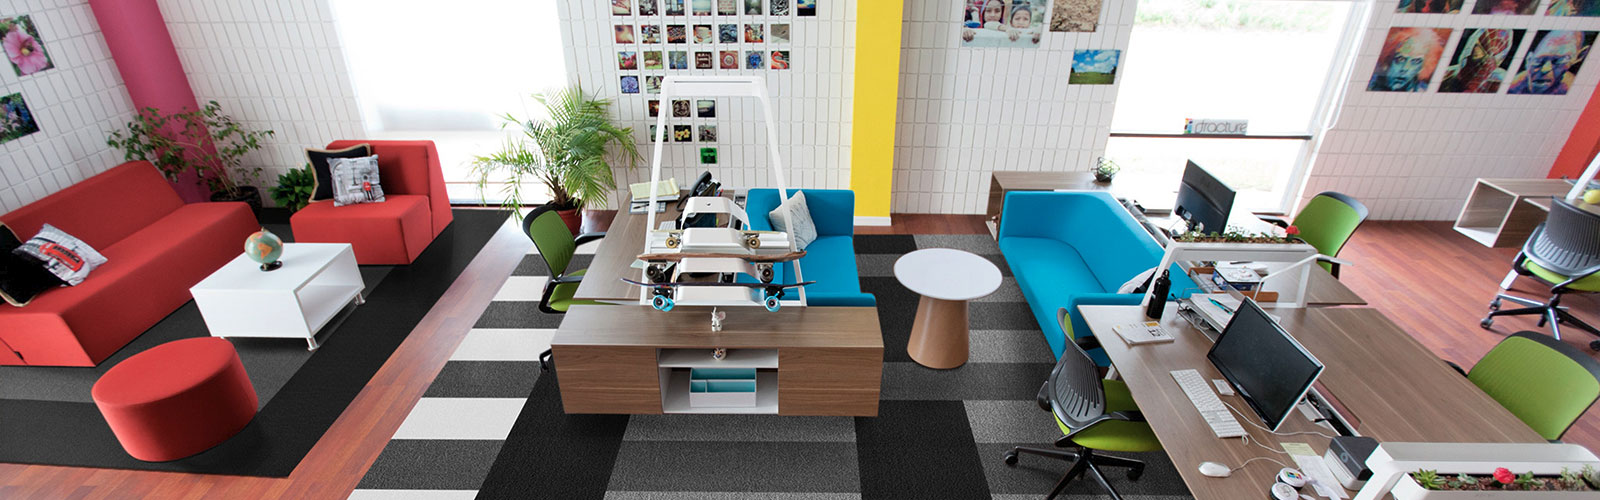 Colourful-Office-Space-edited